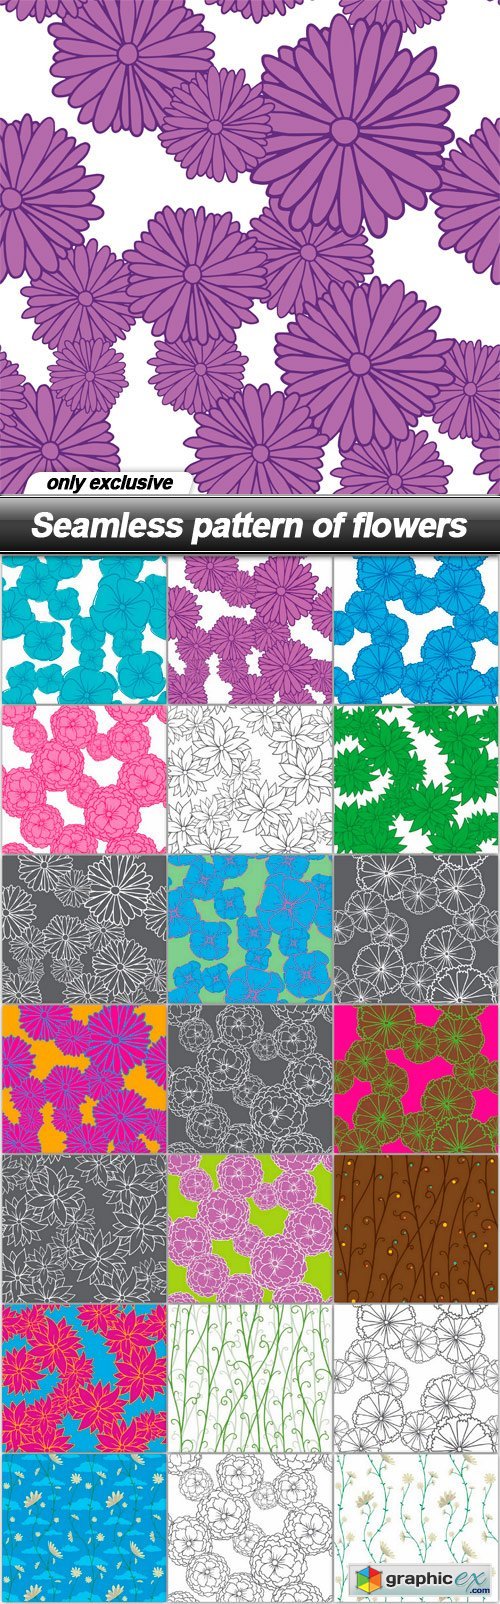 Seamless pattern of flowers - 21 EPS